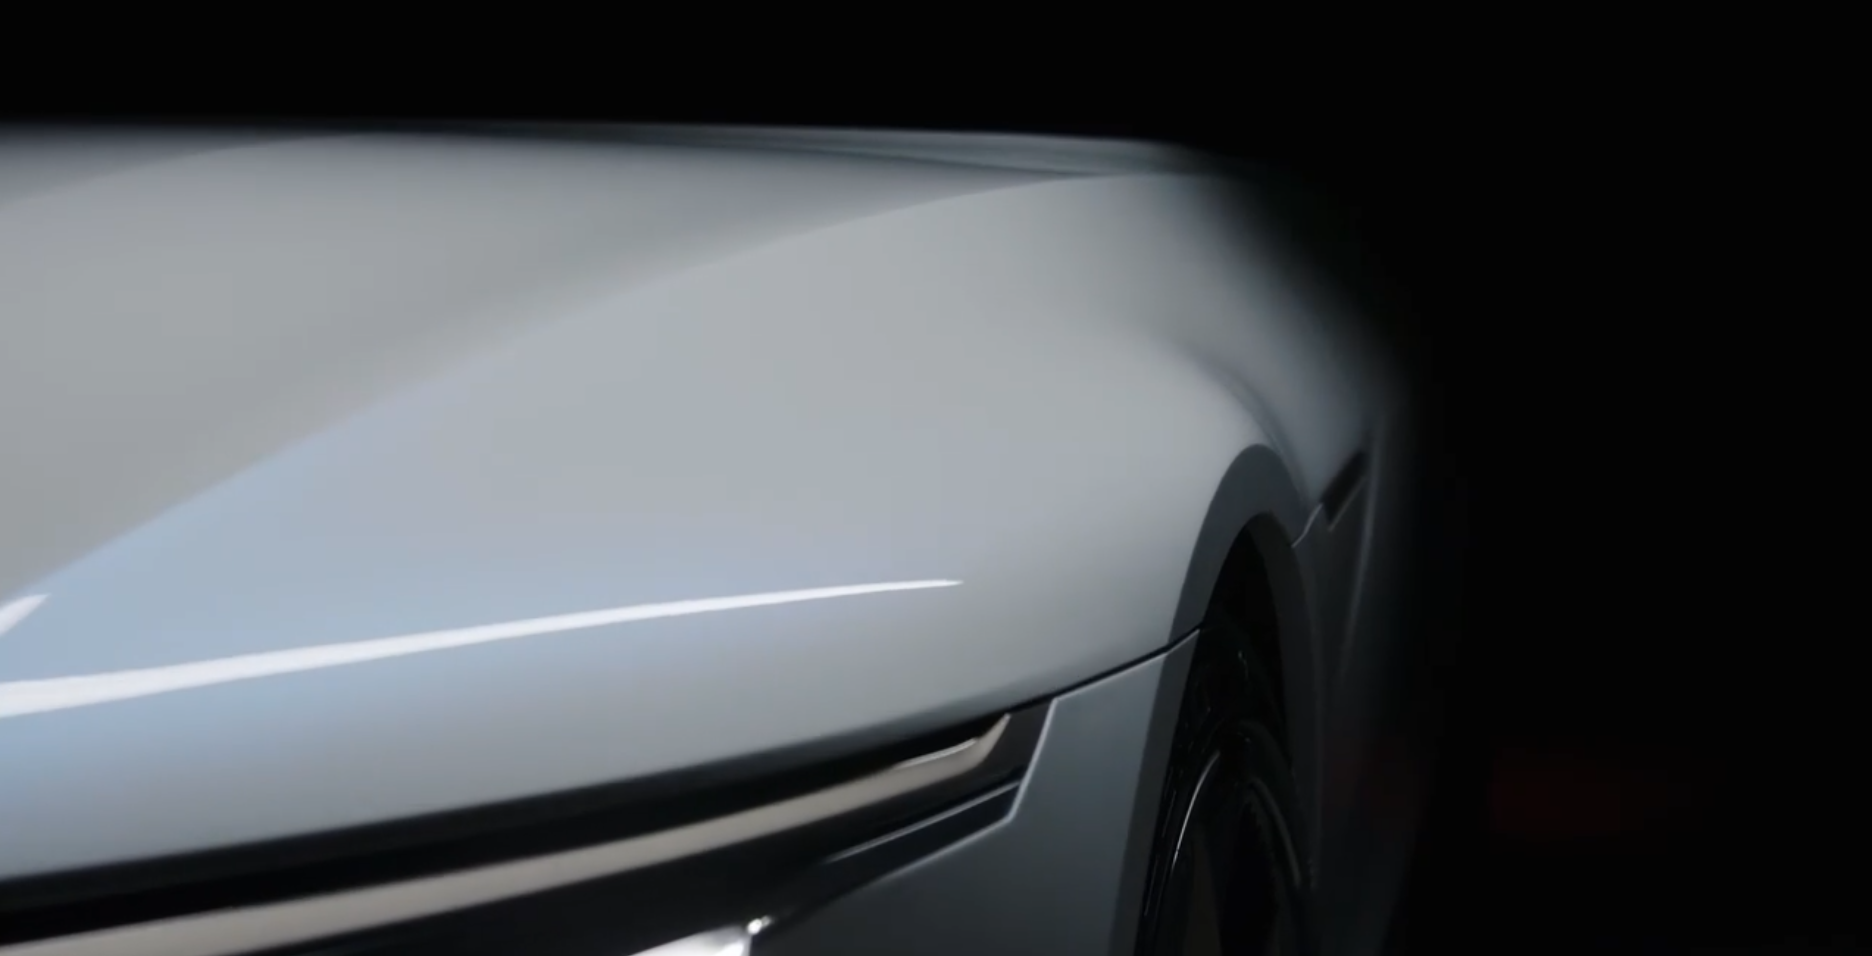 Teaser photo of GM Celectiq at CES 2021